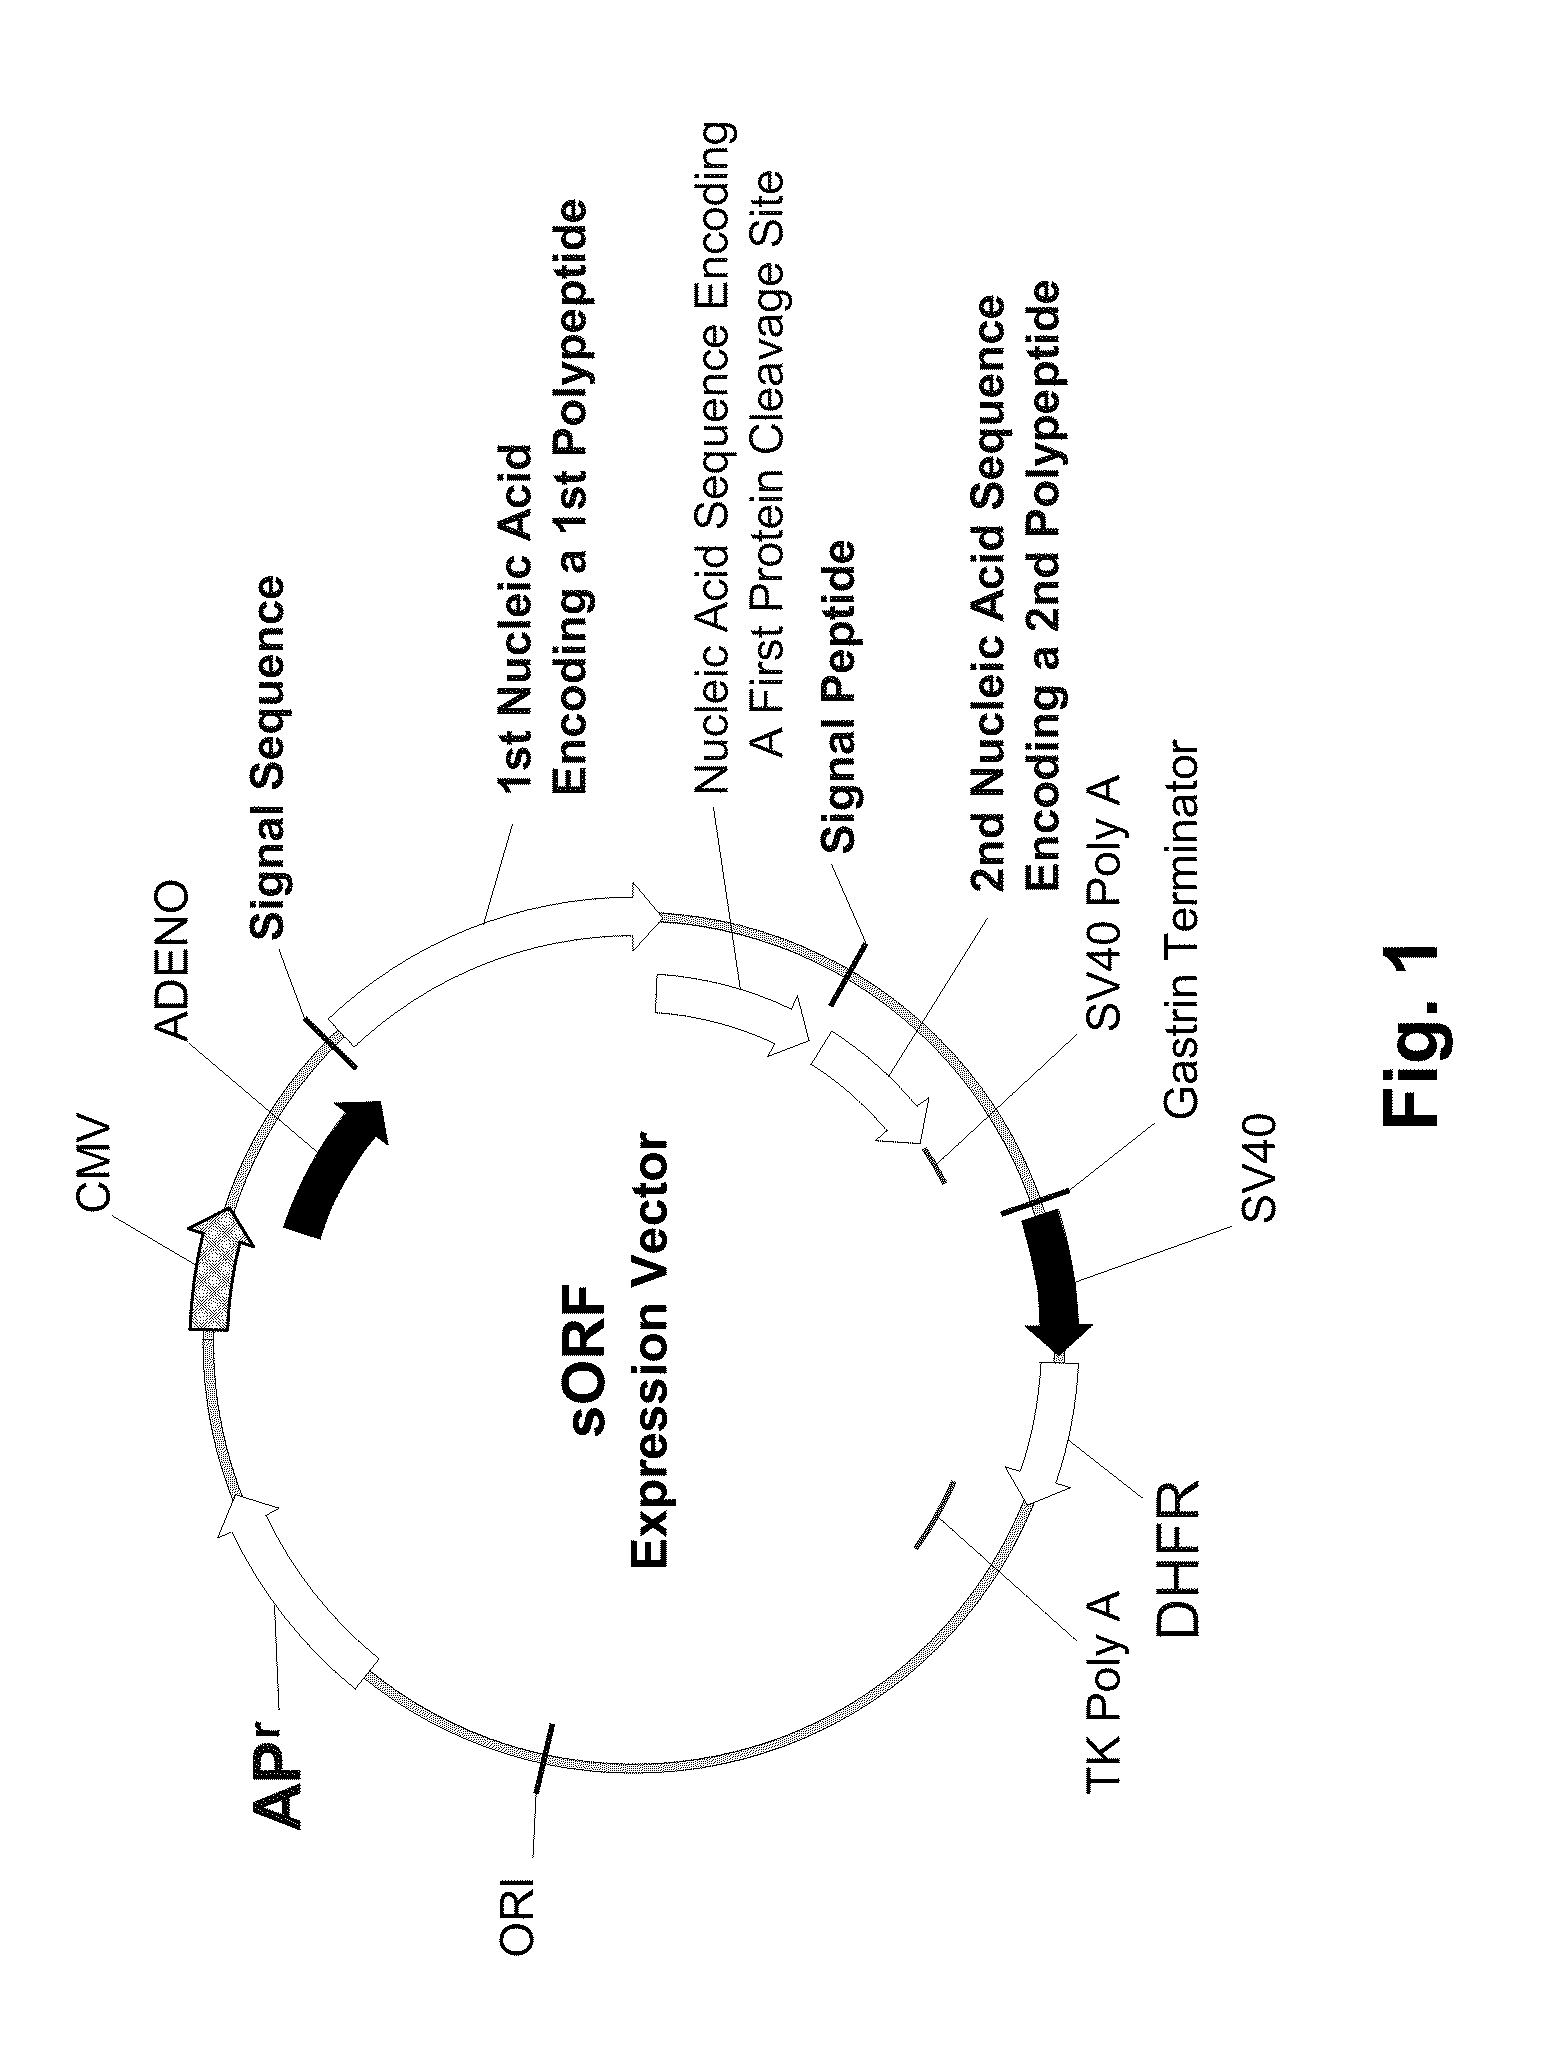 Multiple Gene Expression Including sORF Constructs and Methods with Polyproteins, Pro-Proteins and Proteolysis